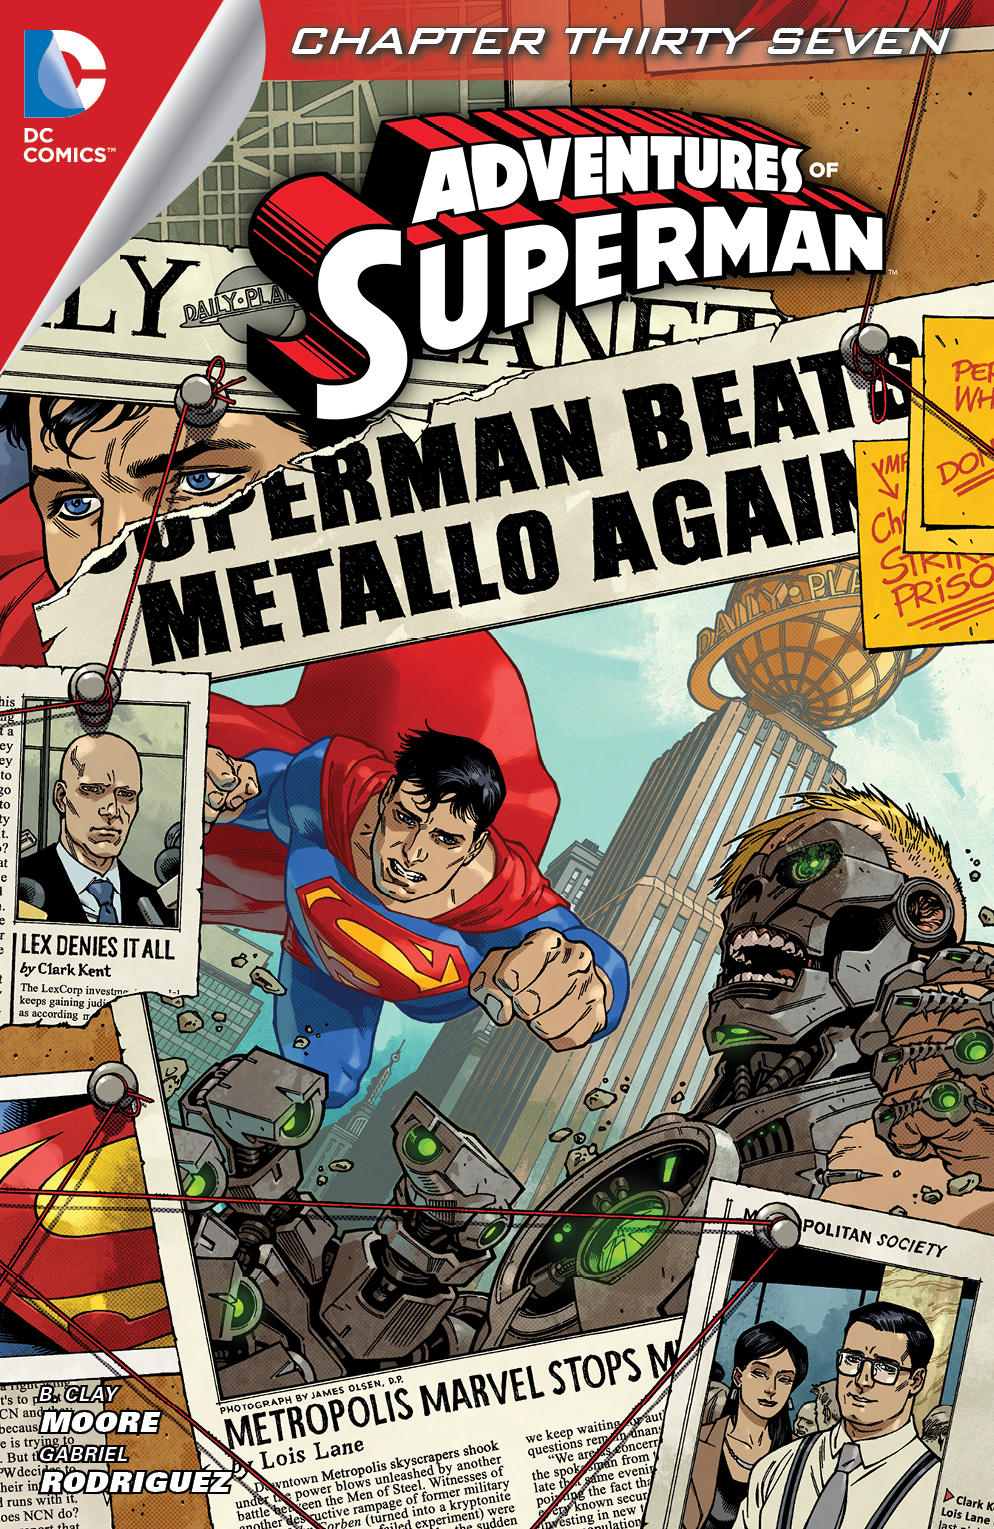 Adventures of Superman (2013-) #37 preview images